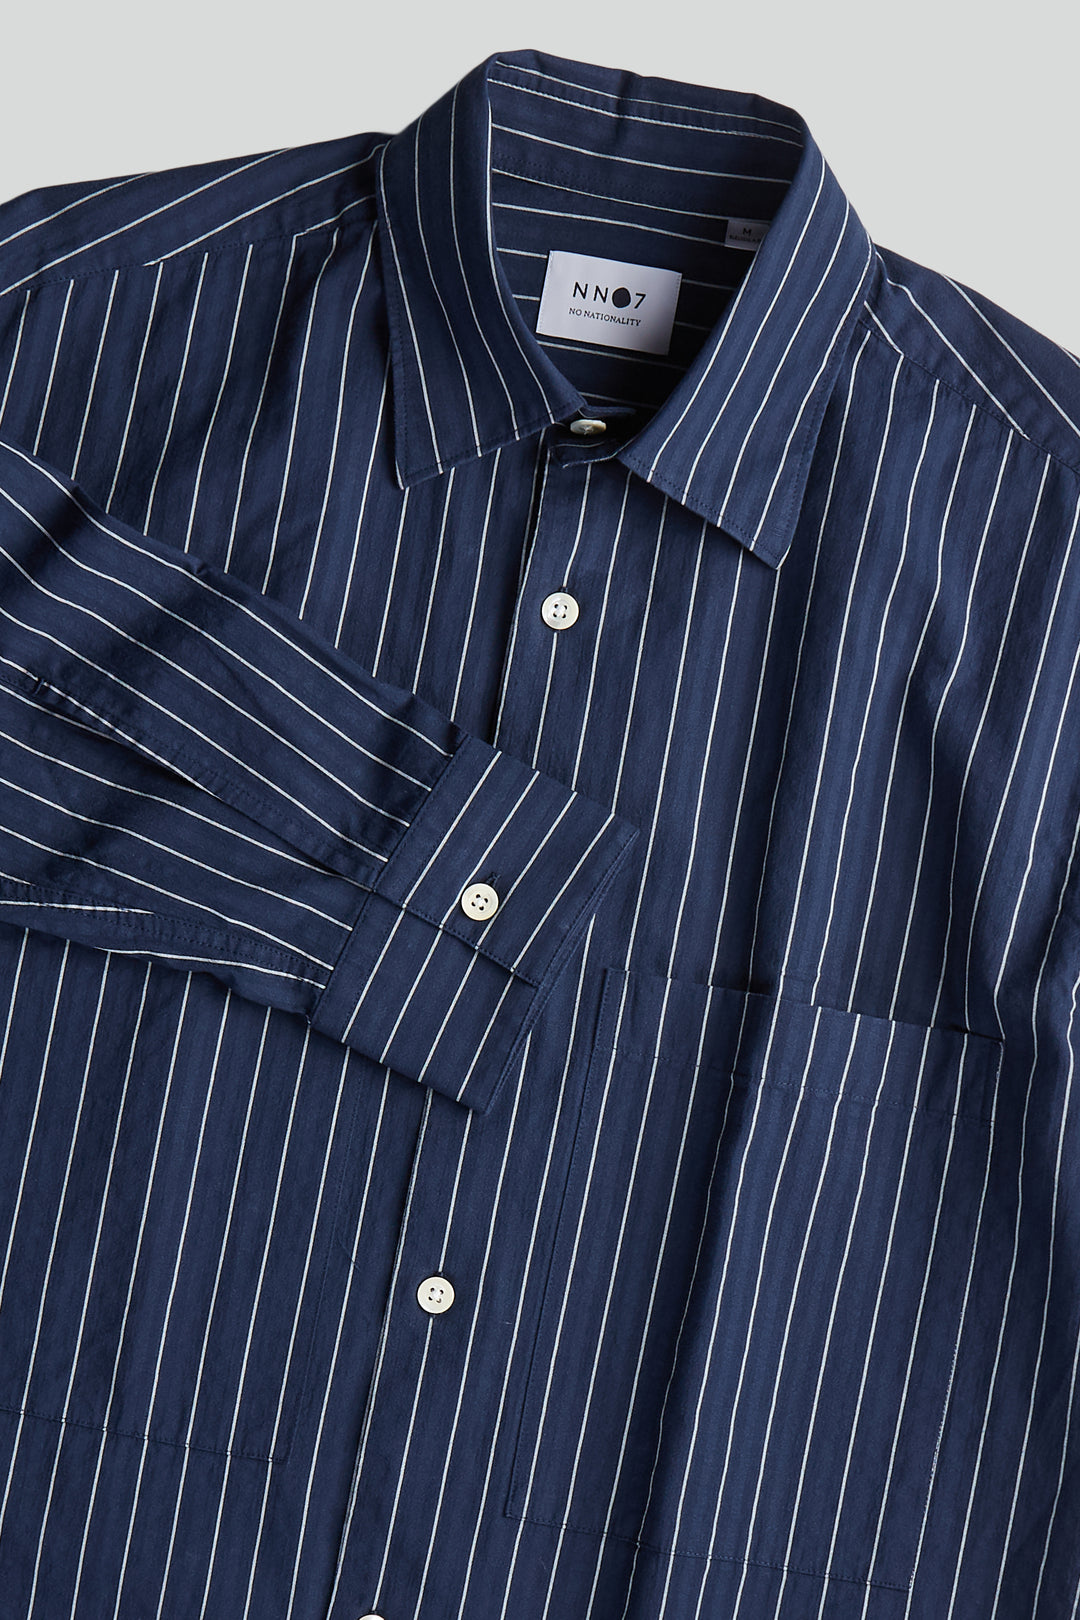 NN07 - Freddy 5228 Cotton Shirt in Navy Stripe | Buster McGee